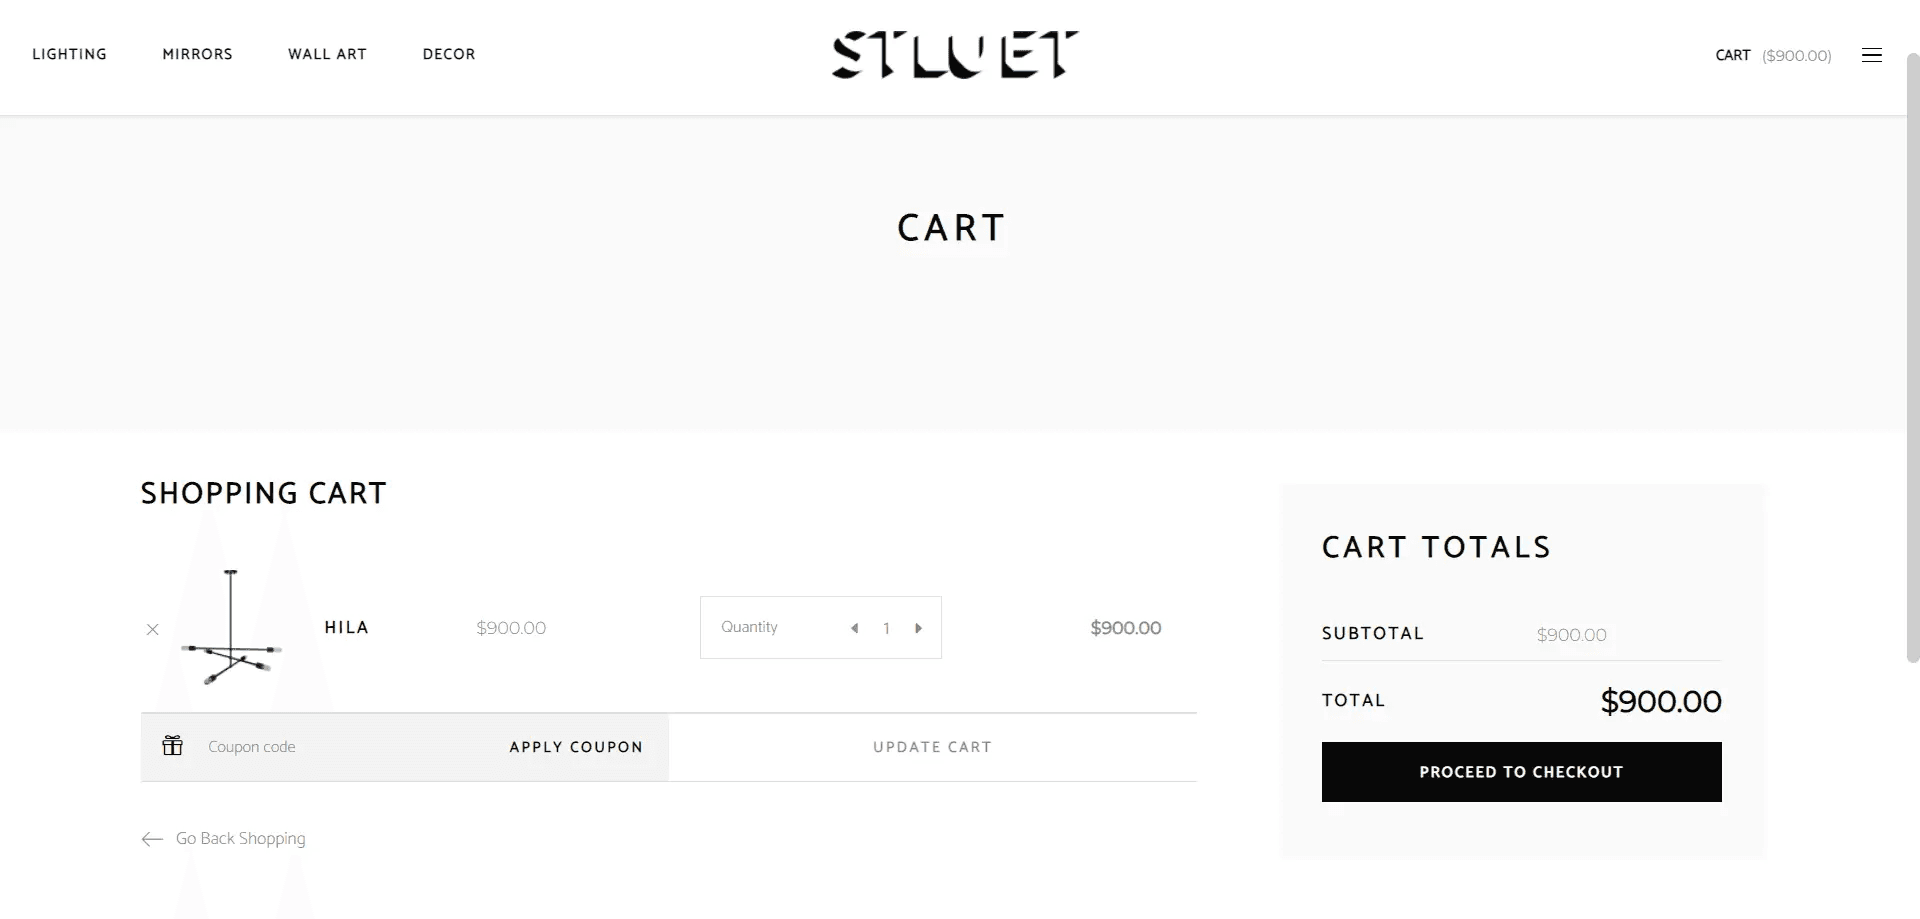 The shopping cart page contains everything you would expect to find, and no surprises. Information about the products in your cart, a button to continue shopping, and a button to proceed to checkout